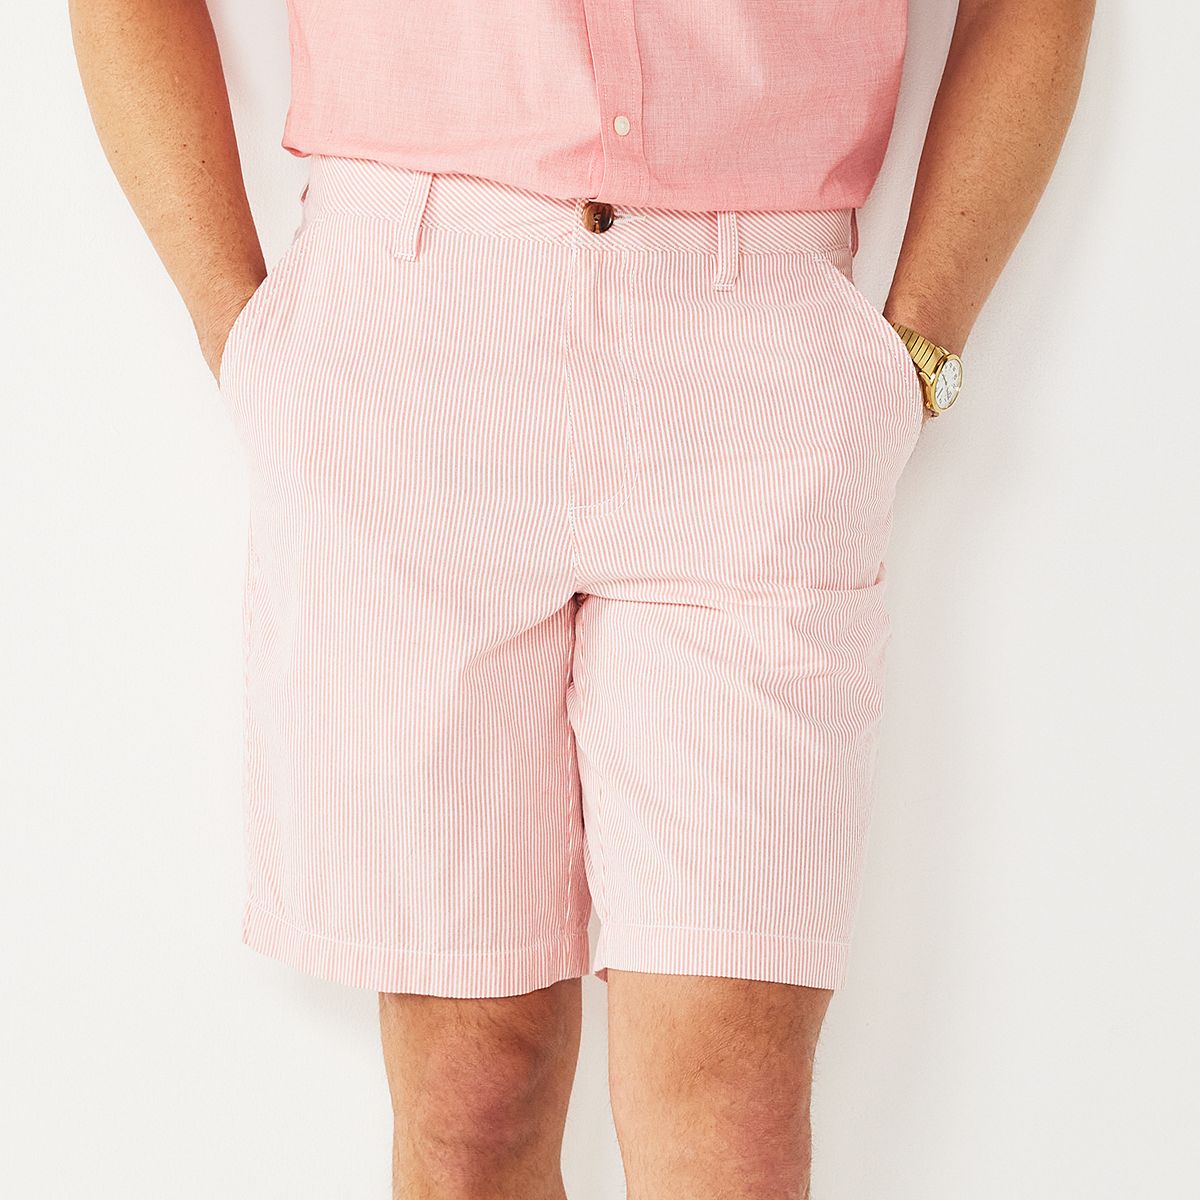 Men’s Croft & Barrow Shorts are on clearance for $7.20